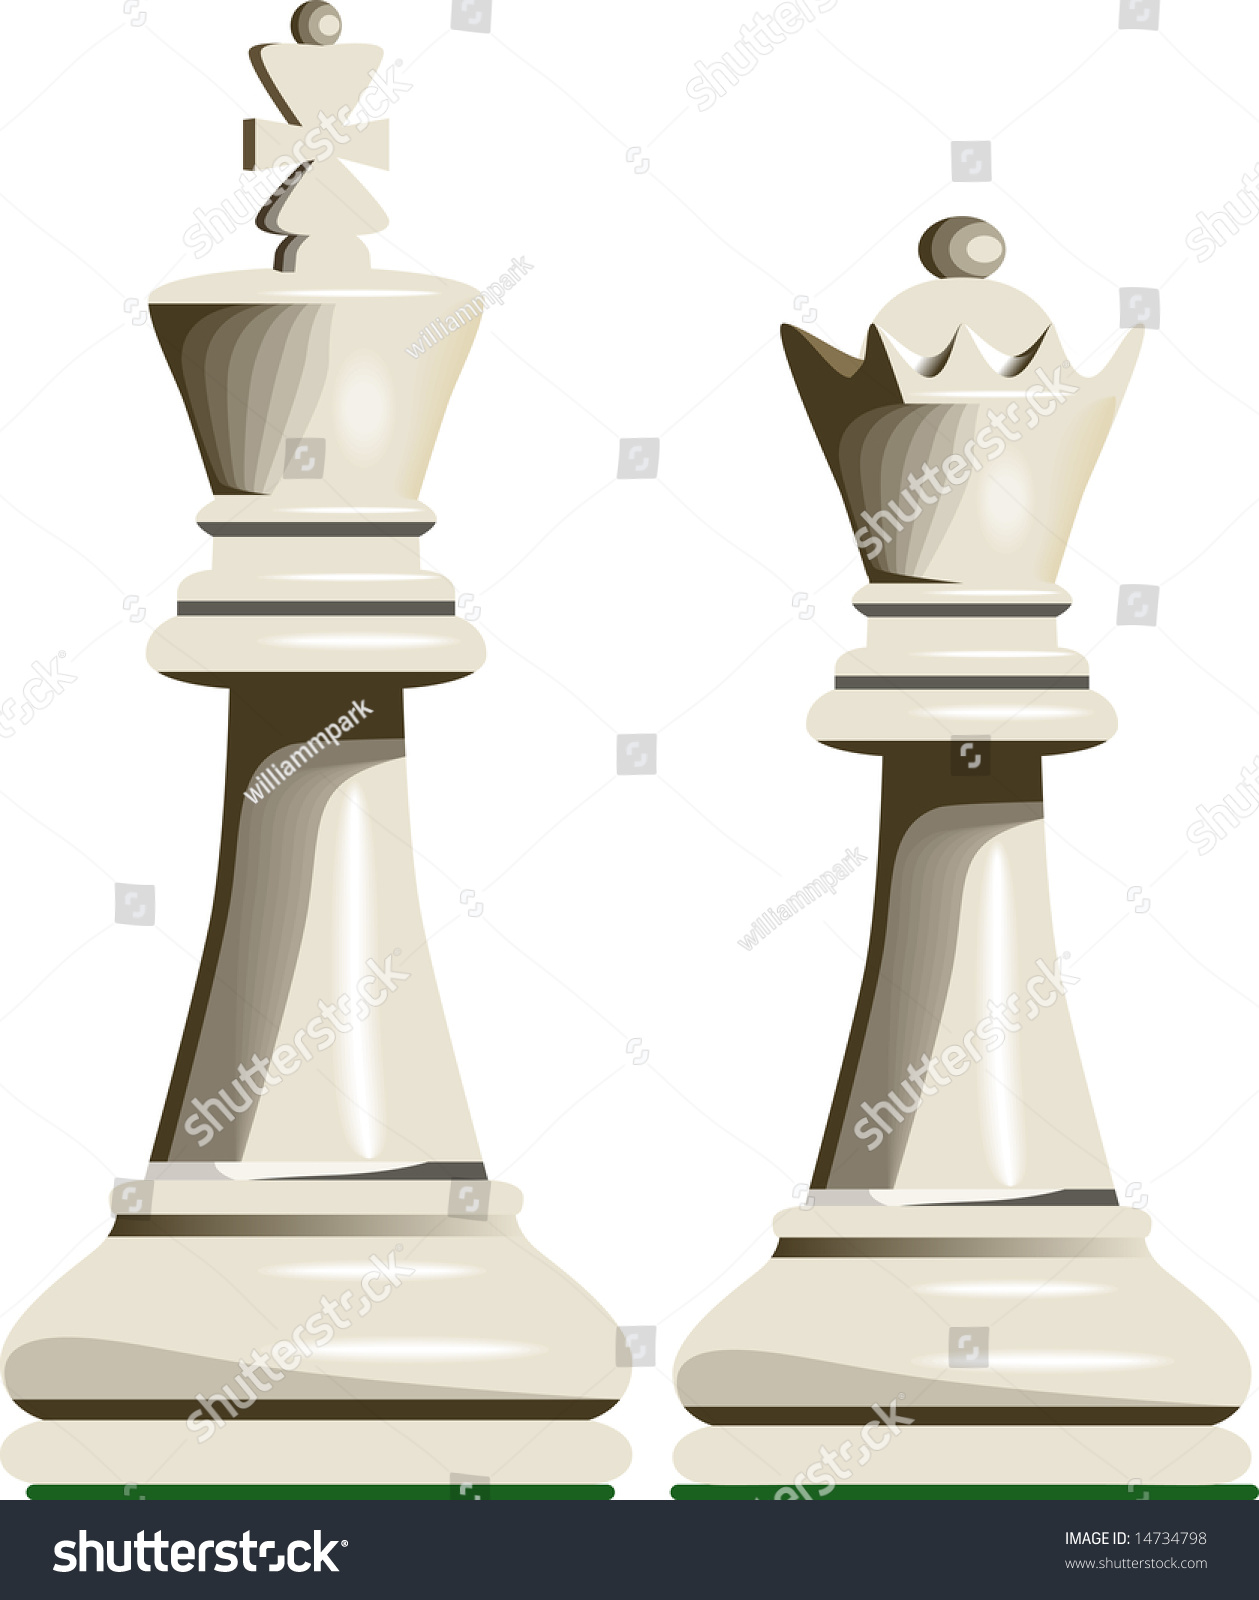 White King Queen Chess Pieces Stock Vector 14734798 - Shutterstock